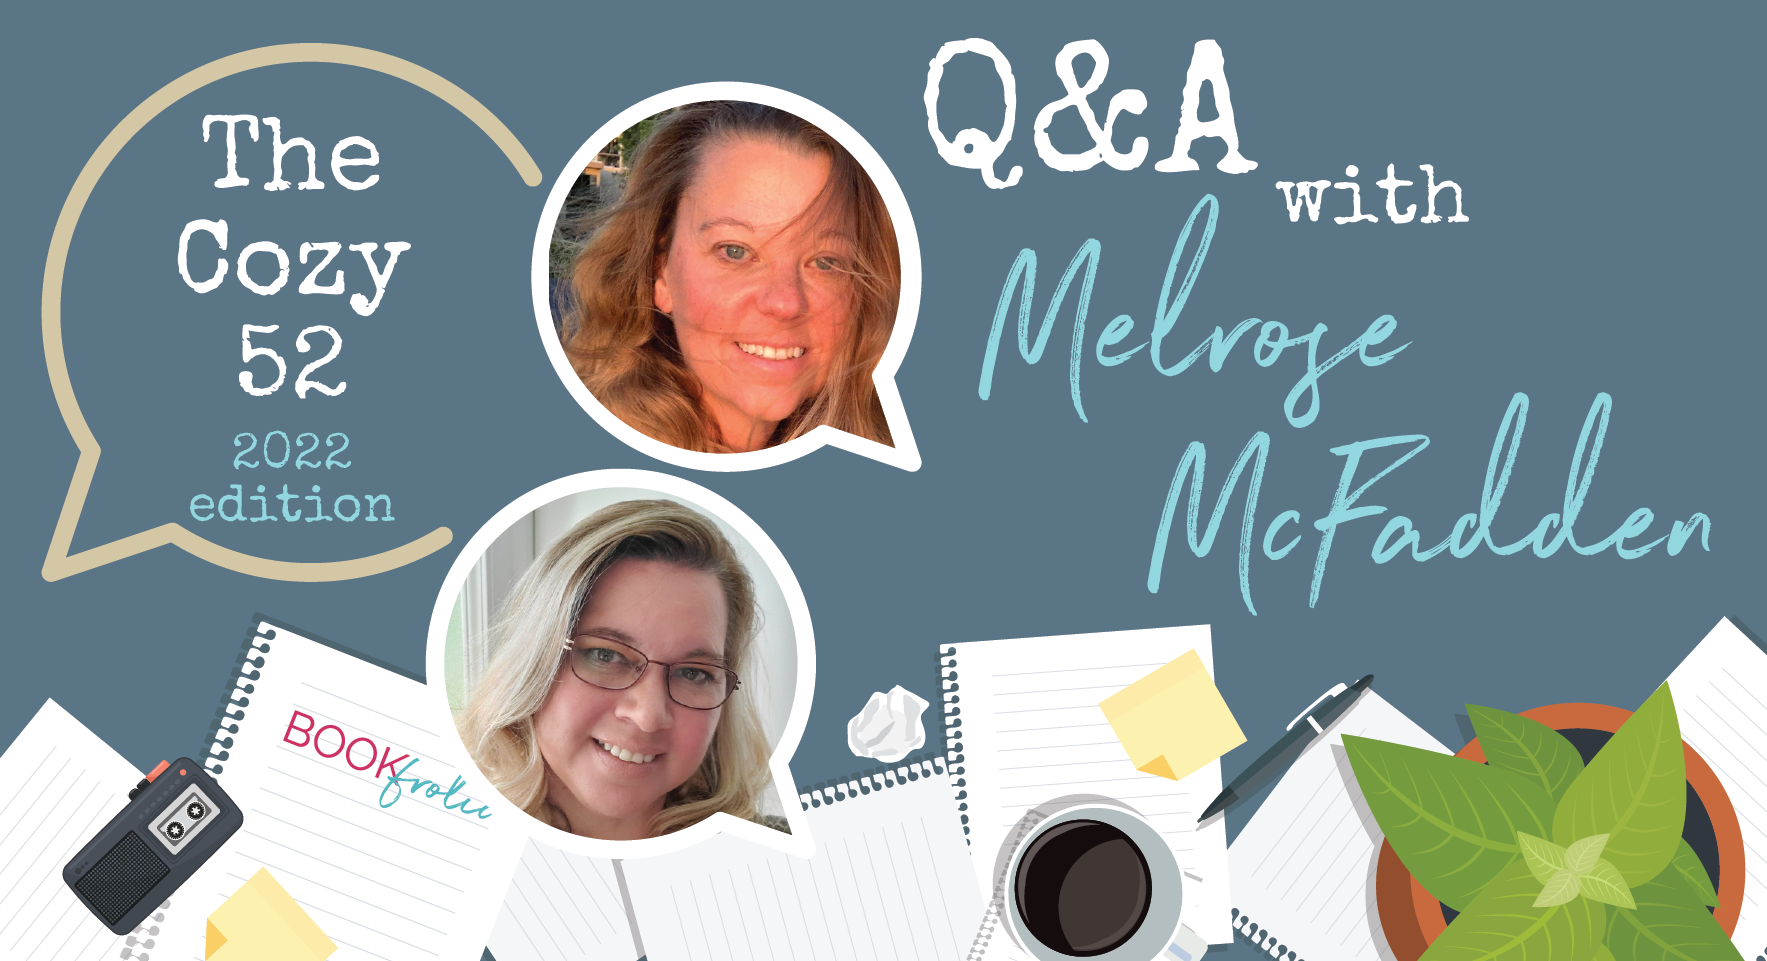 The Cozy 52 Q&A with Melrose McFadden